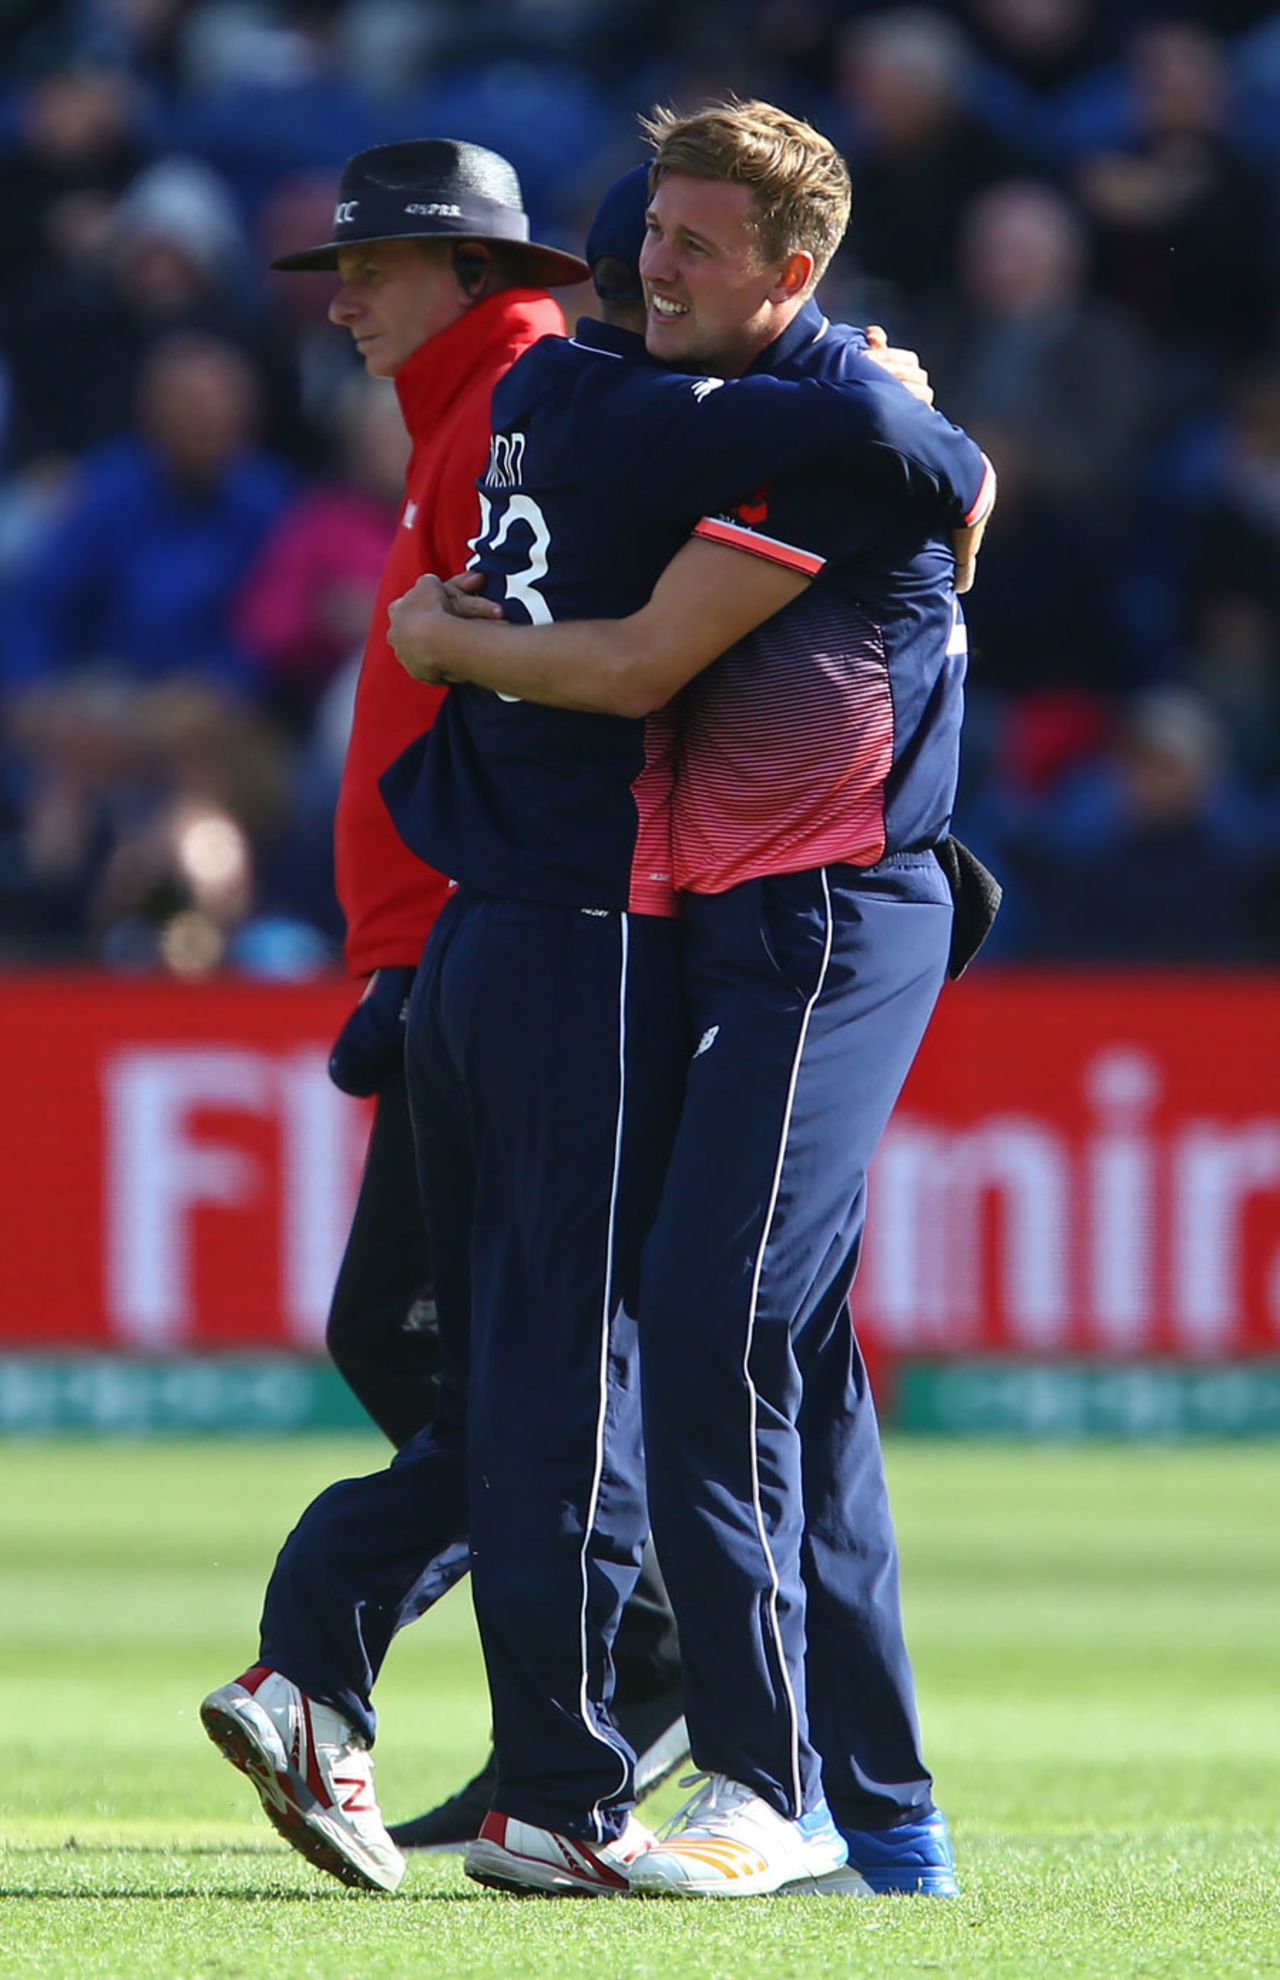 Jake Ball gets a hug after removing Ross Taylor, England v New Zealand, Champions Trophy 2017, Cardiff, June 6, 2017